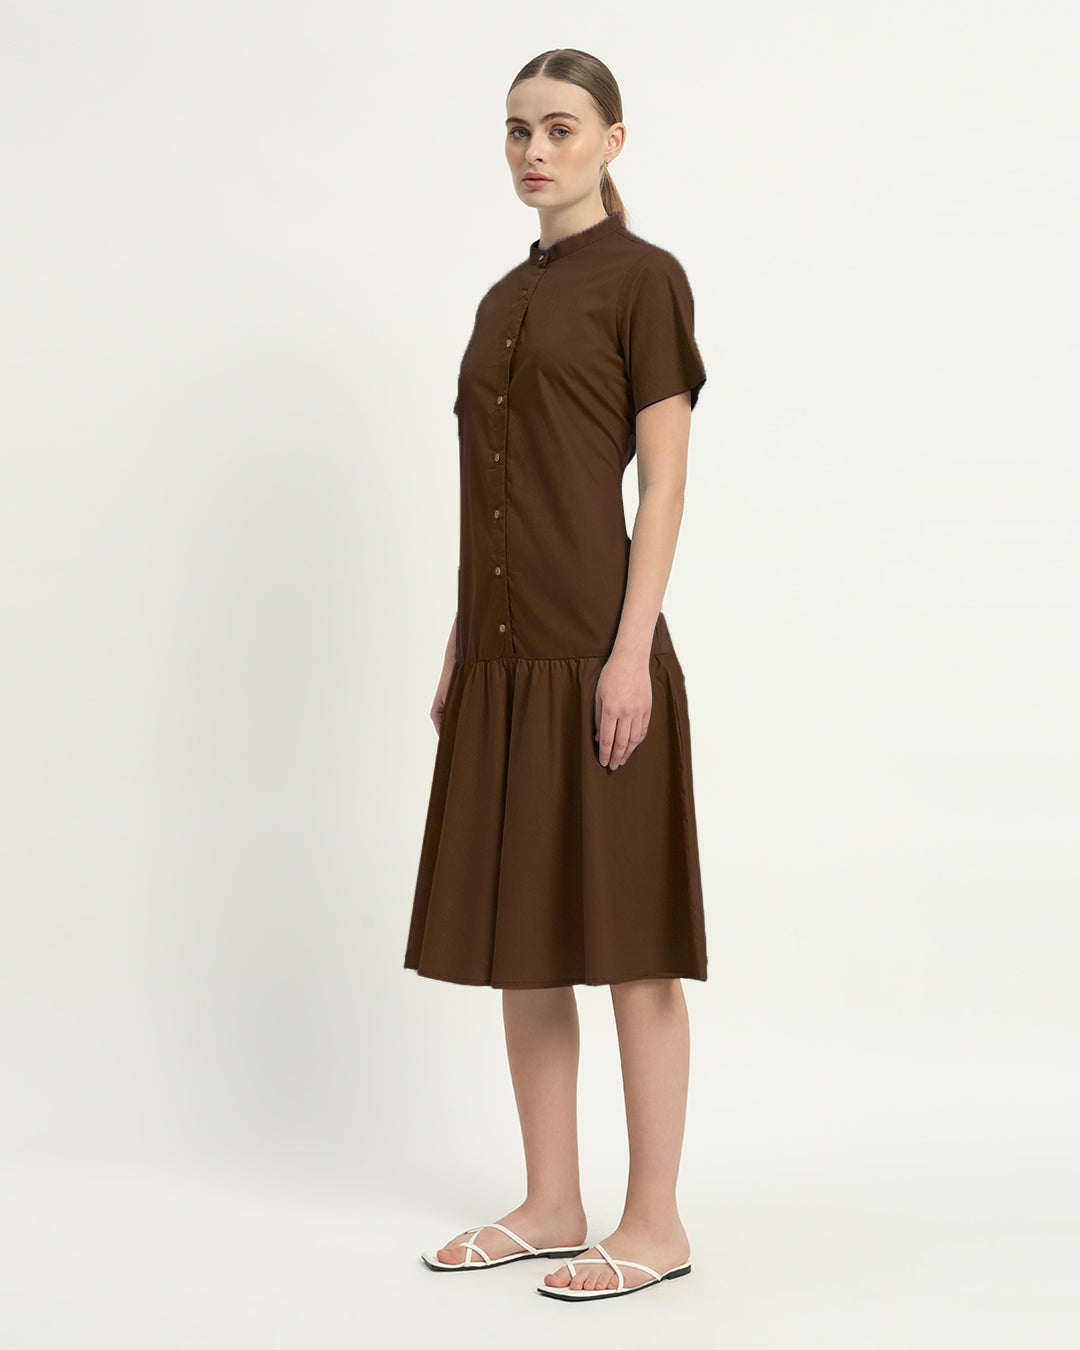 The Nutshell Melrose Cotton Dress